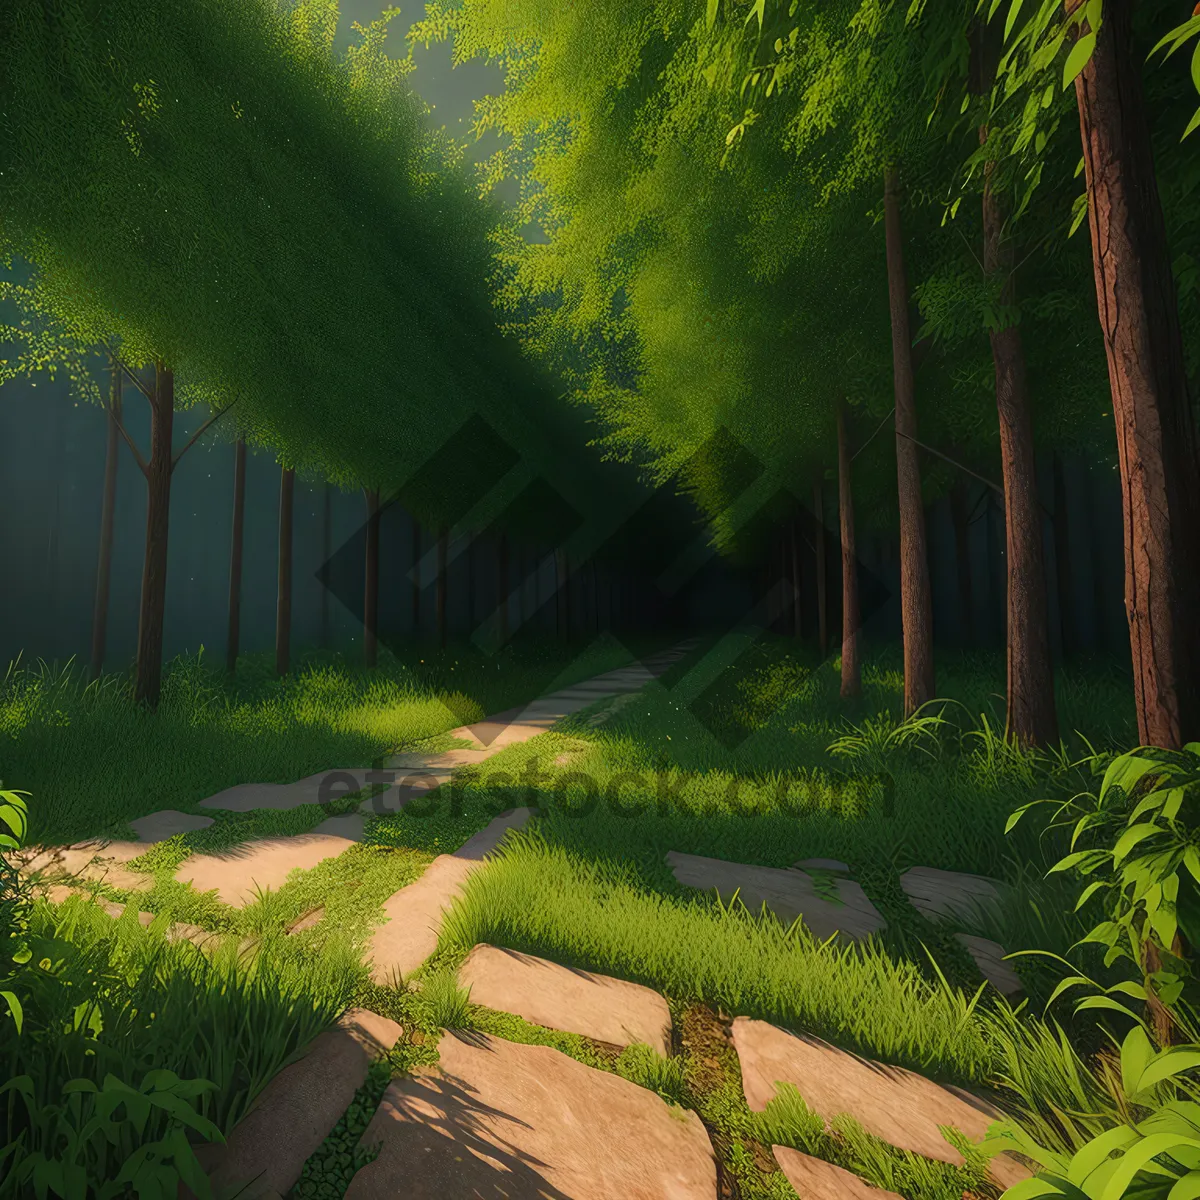 Picture of Sunlit Path through Serene Forest